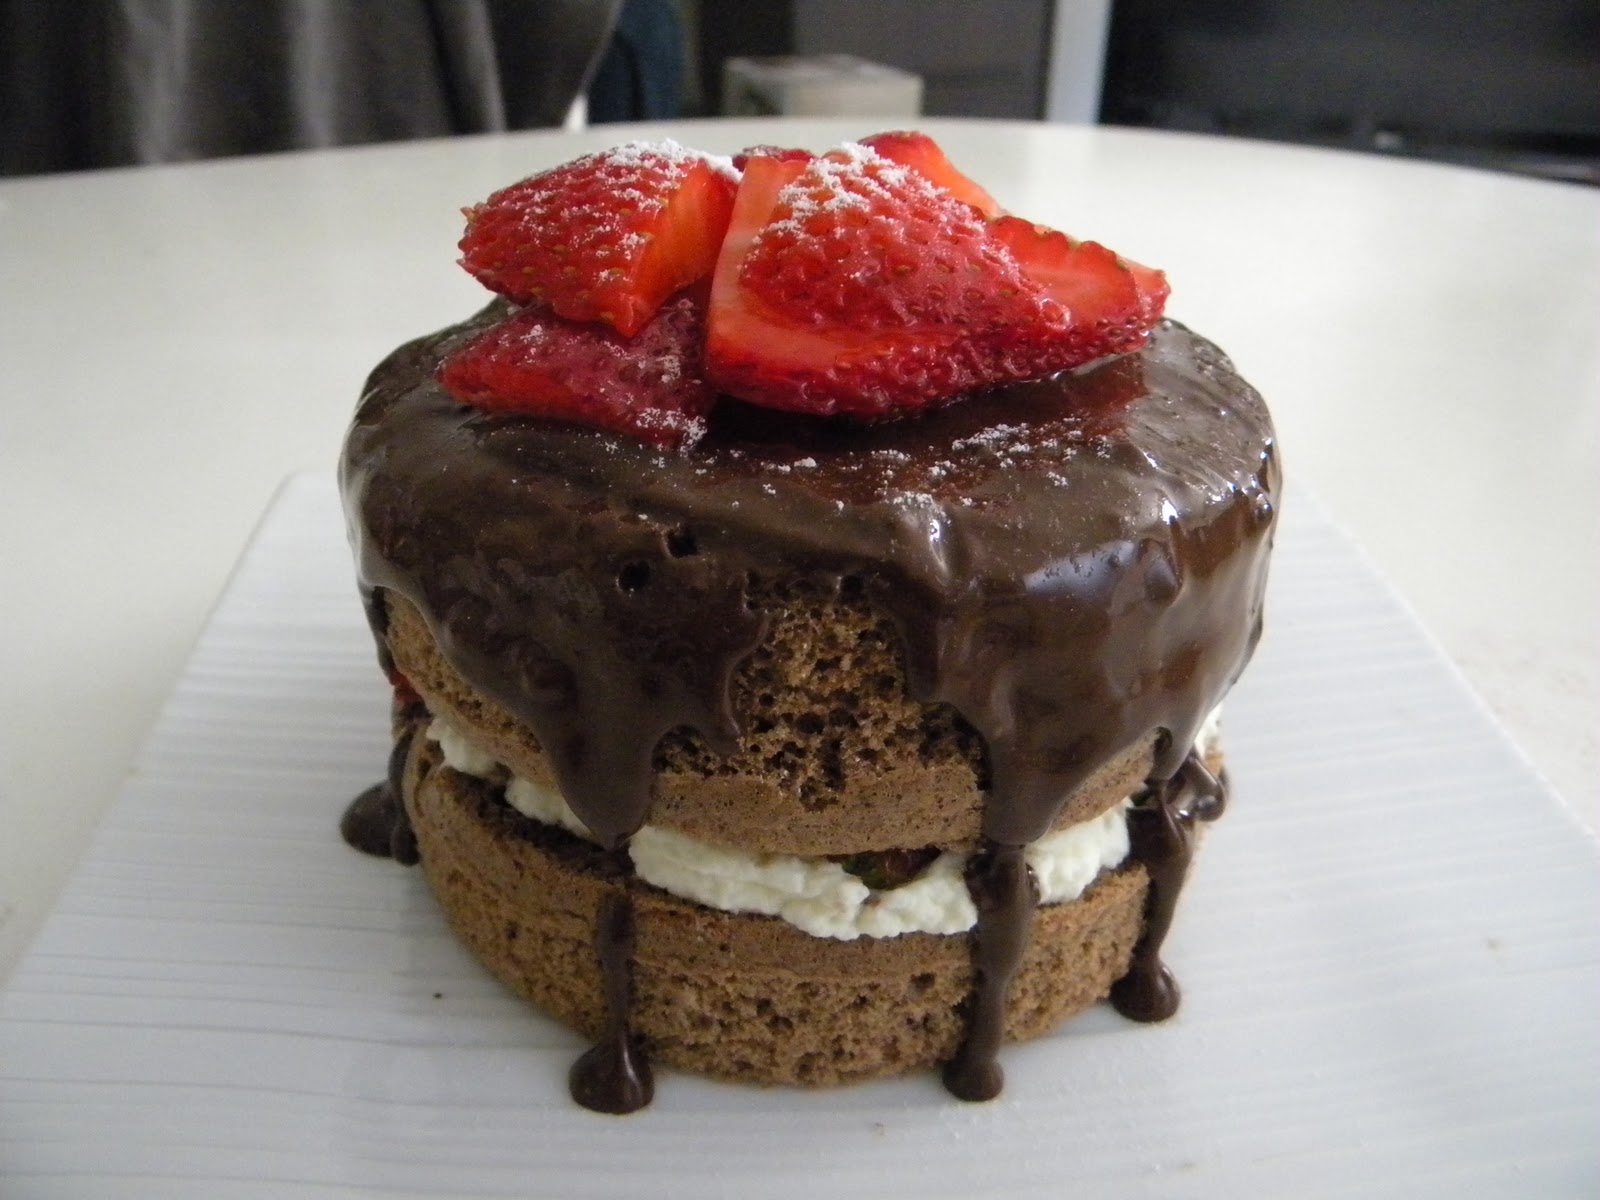 chocolate cake recipe with strawberries ve googled for the recipe and found it at best recipes and i ve 